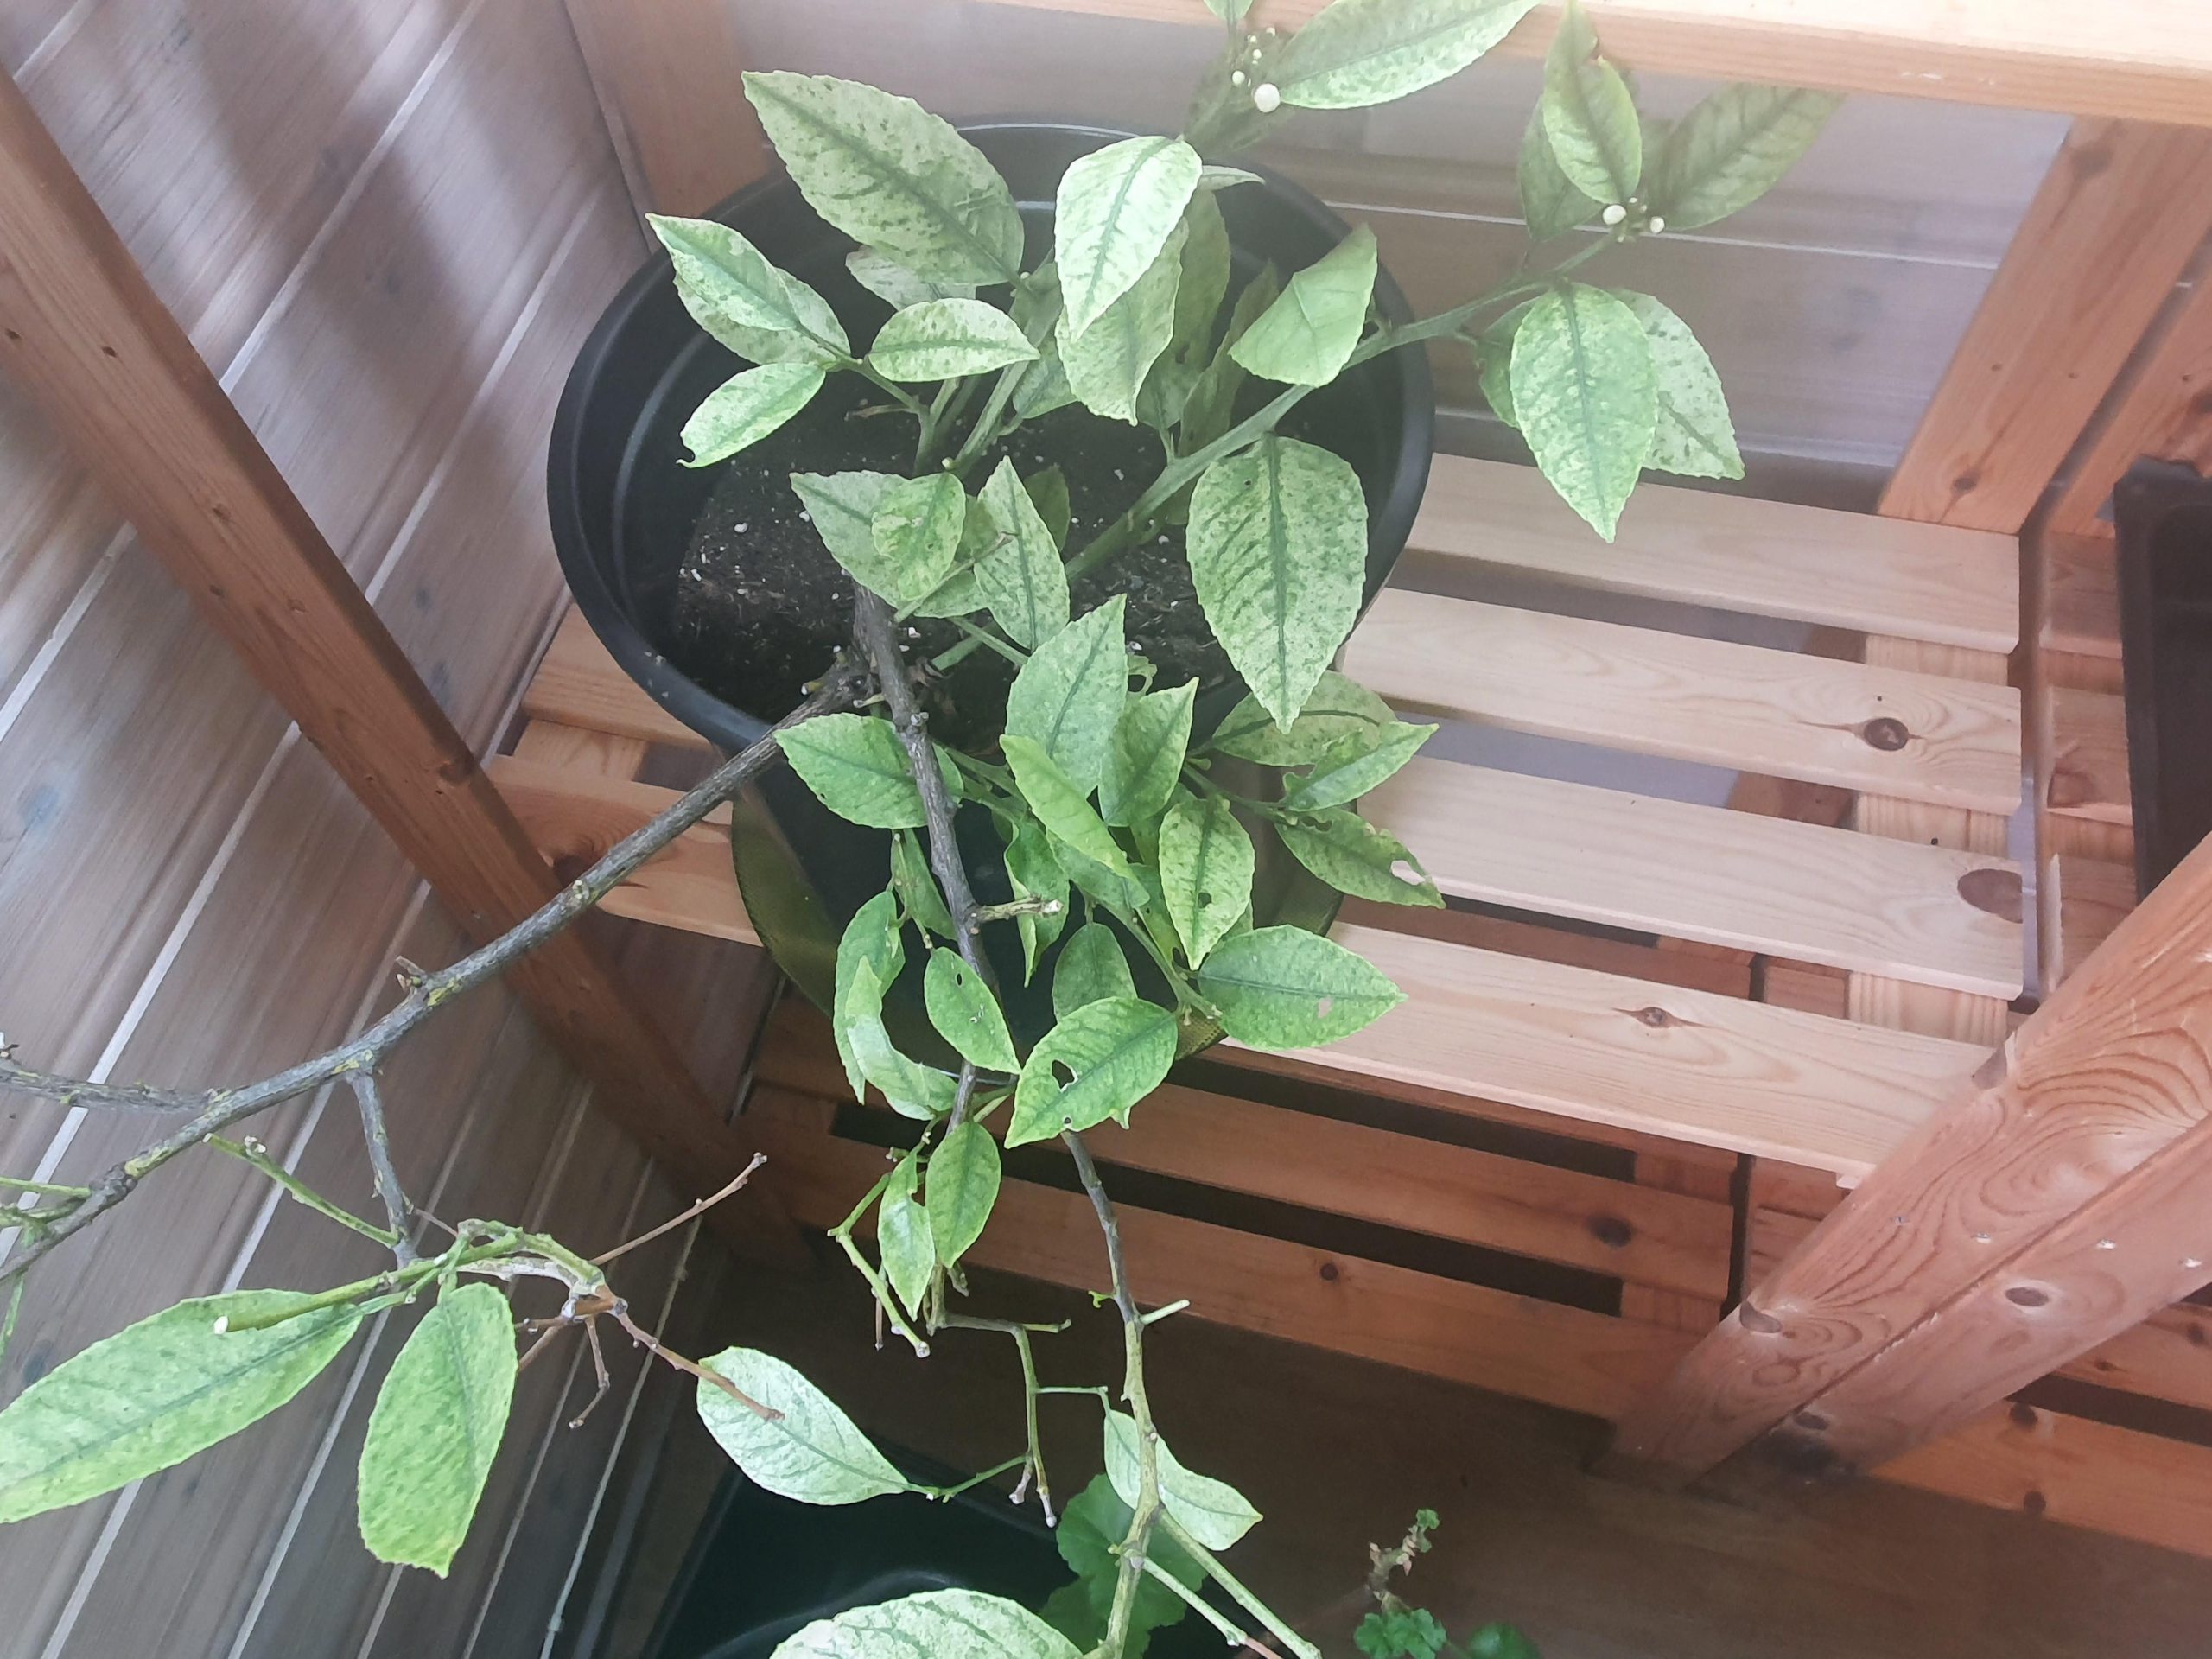 What am i able to raze to place my lemon tree?